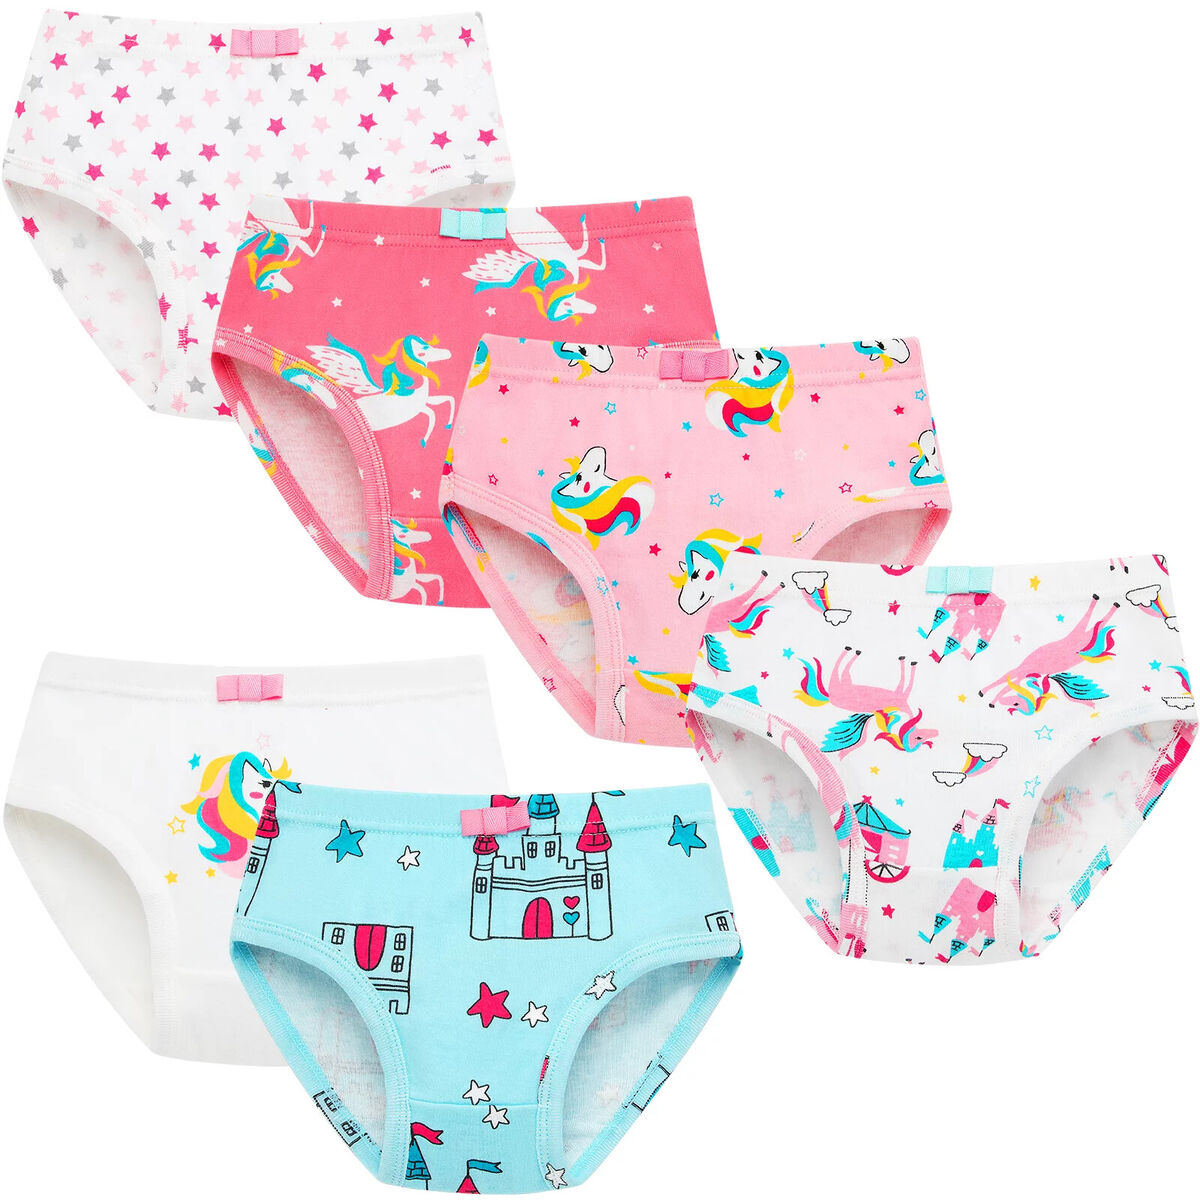 Soft Cotton Briefs for Girls 1-10 Years - Pack of 6